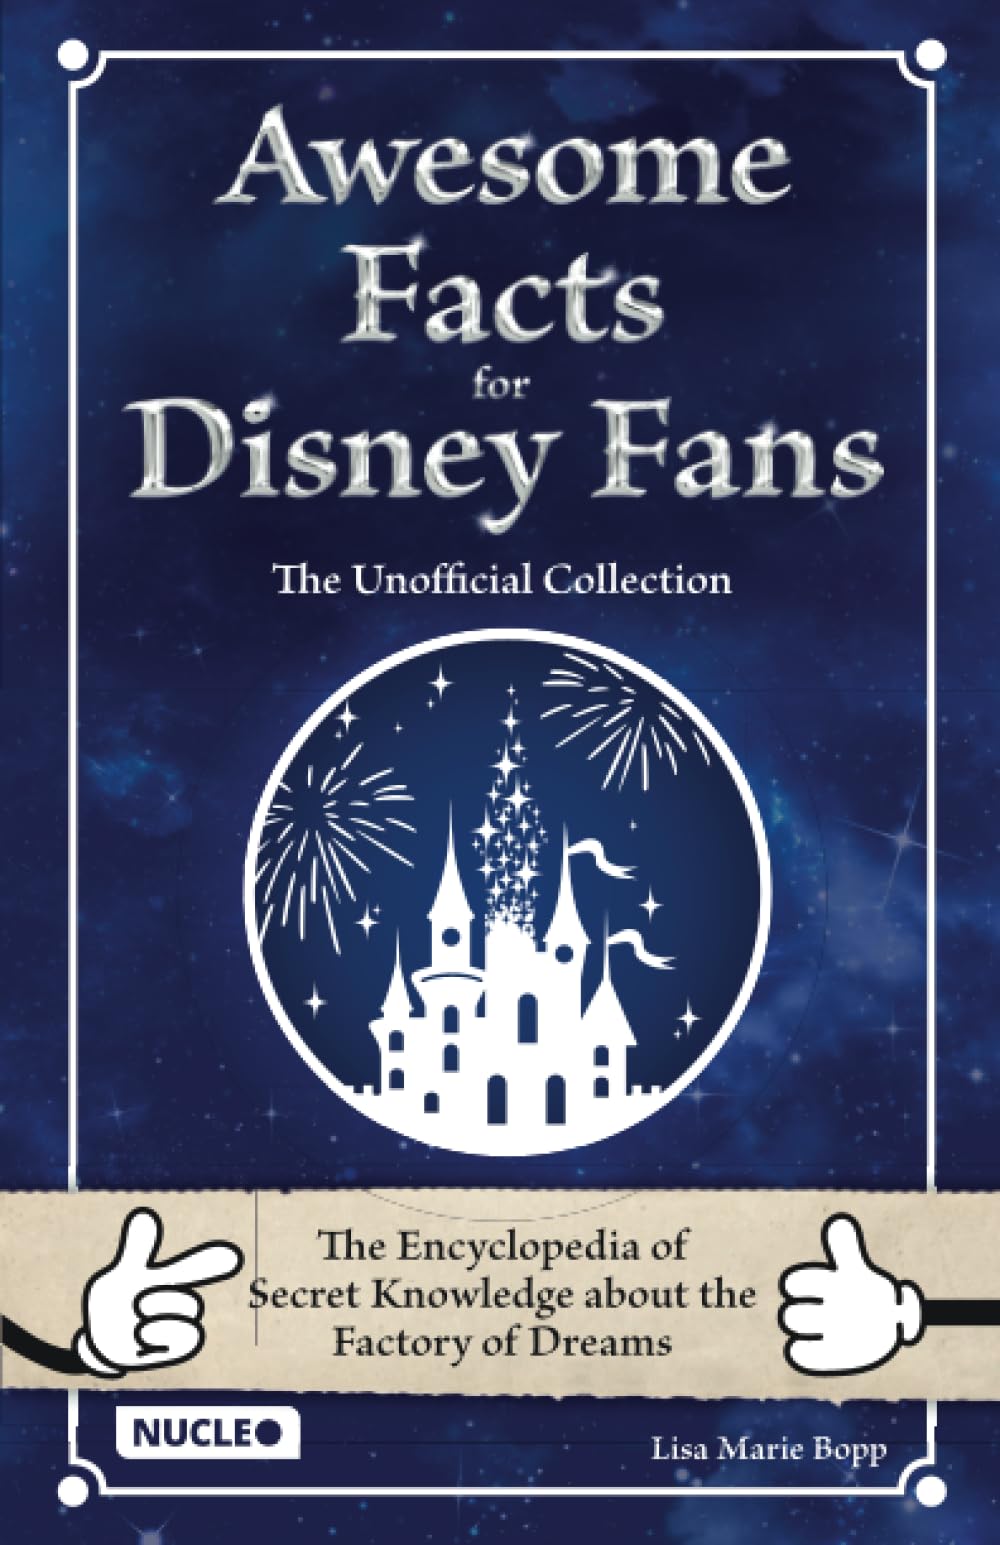 Awesome Facts for Disney Fans – The Unofficial Collection: The Encyclopedia of Secret Knowledge about the Factory of Dreams